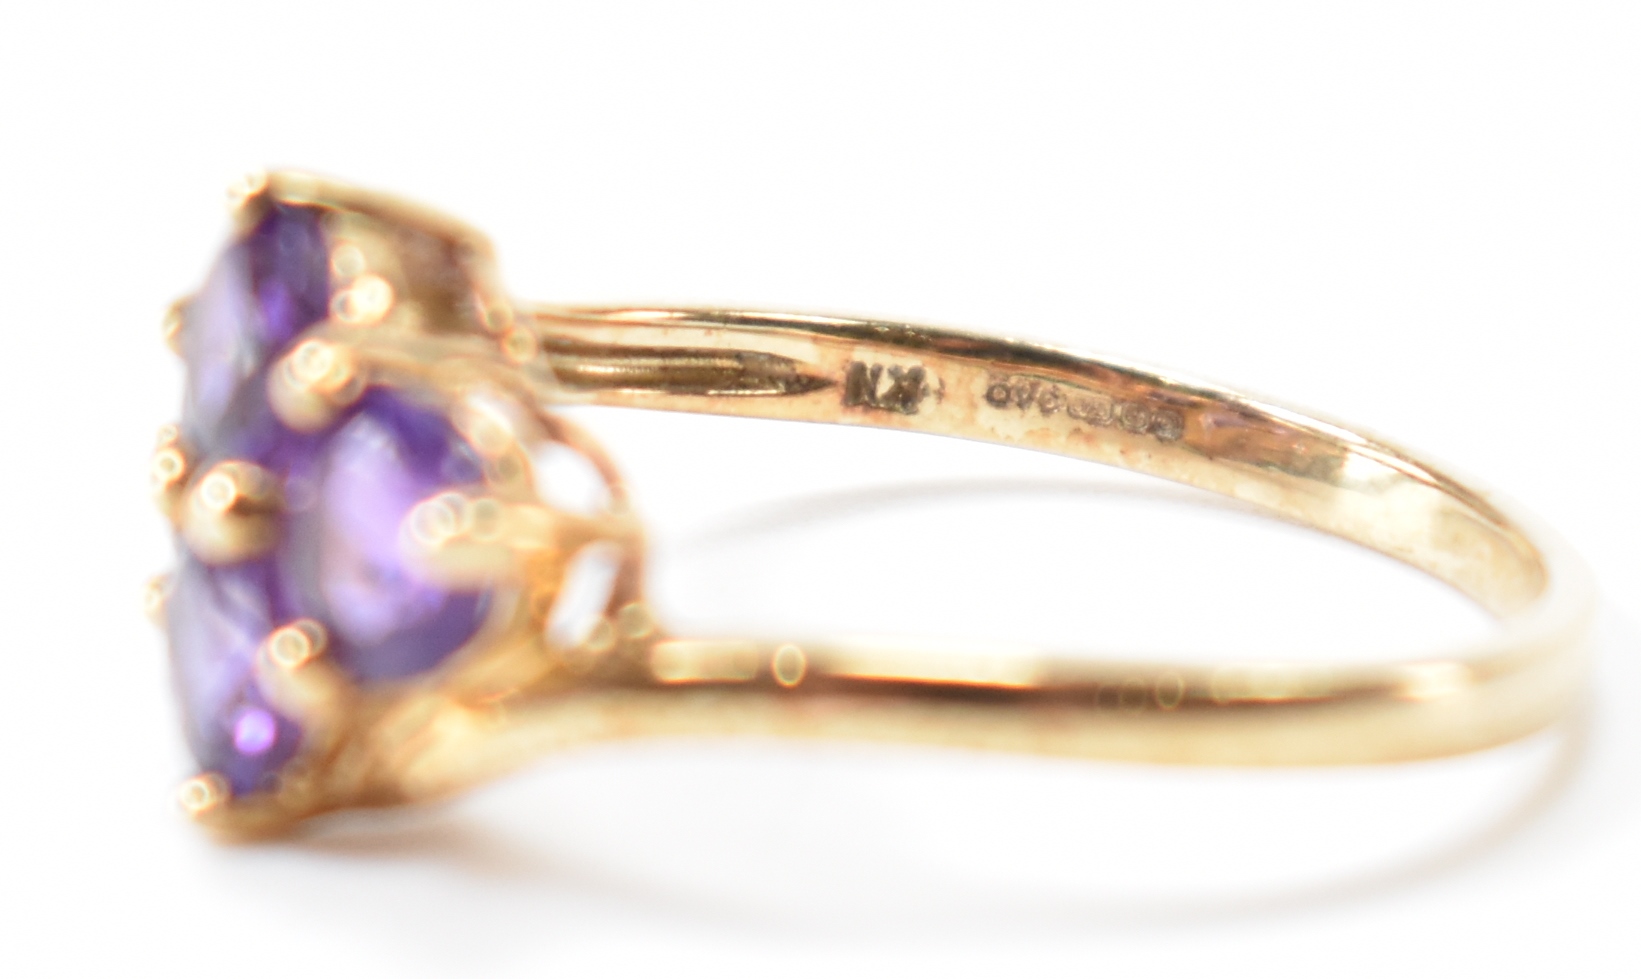 HALLMARKED 9CT GOLD & PURPLE STONE CROSSOVER RING - Image 6 of 8